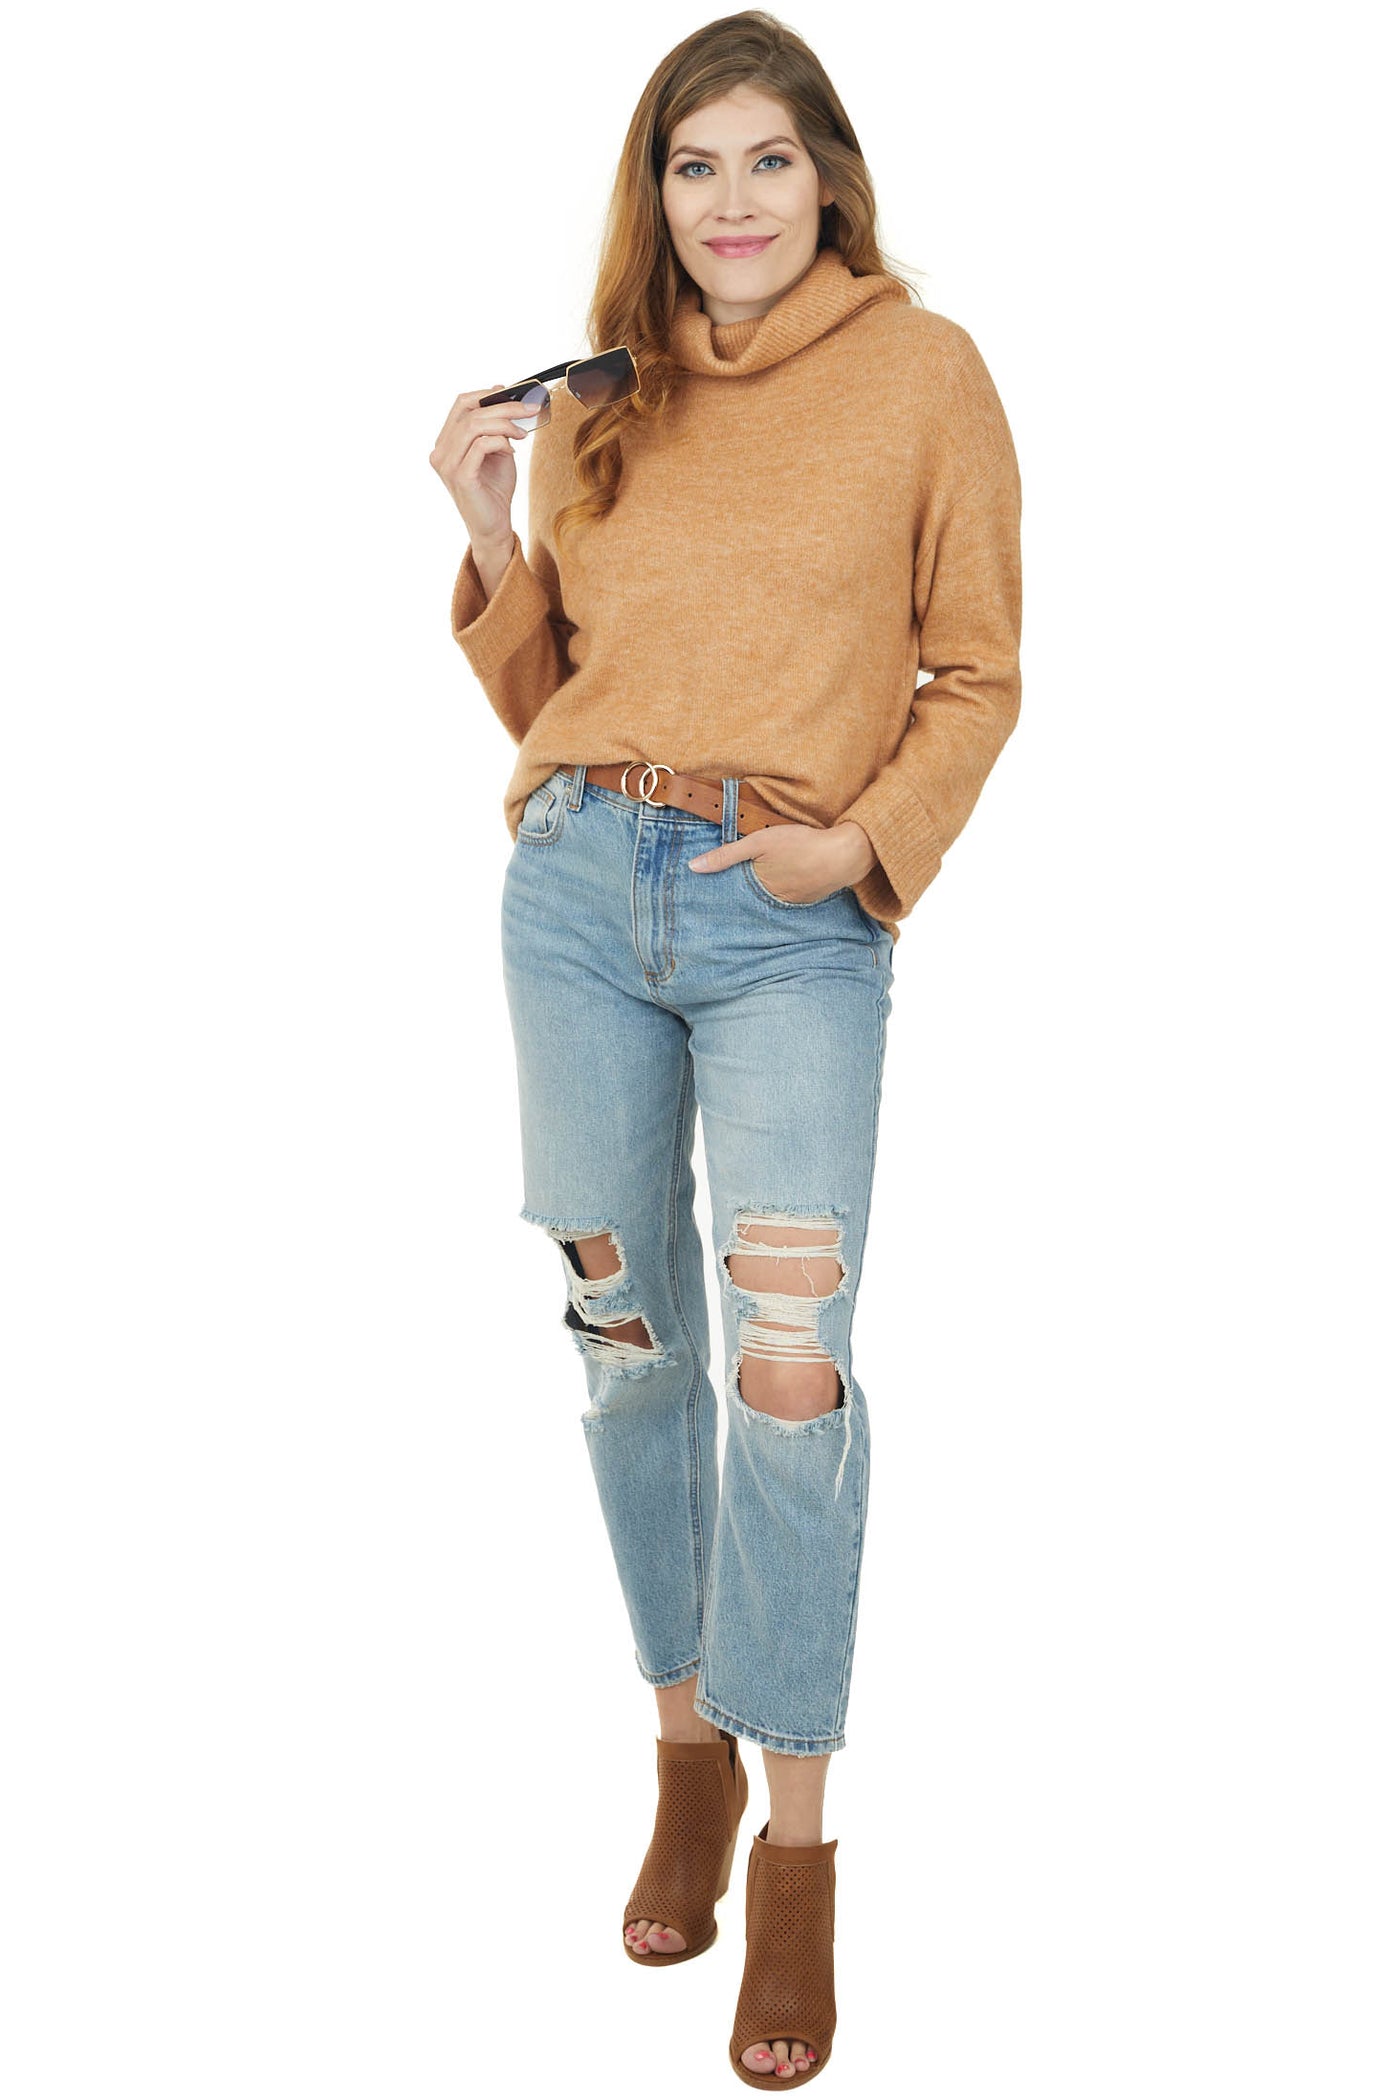 Brown Sugar Neck Long Sleeve Knit Sweater